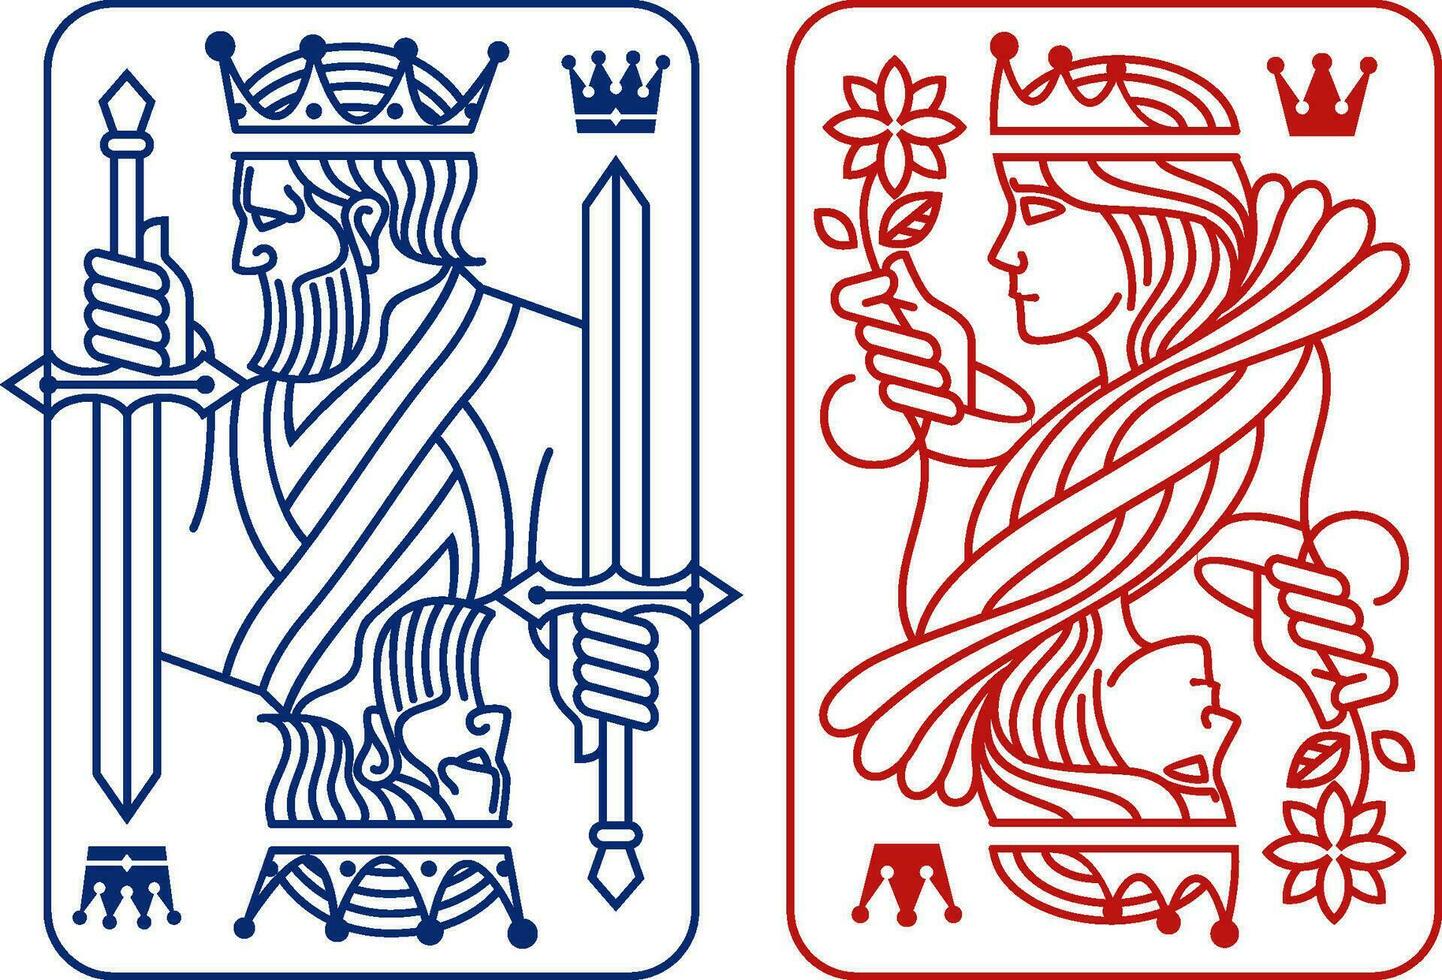 King and queen Playing Card vector